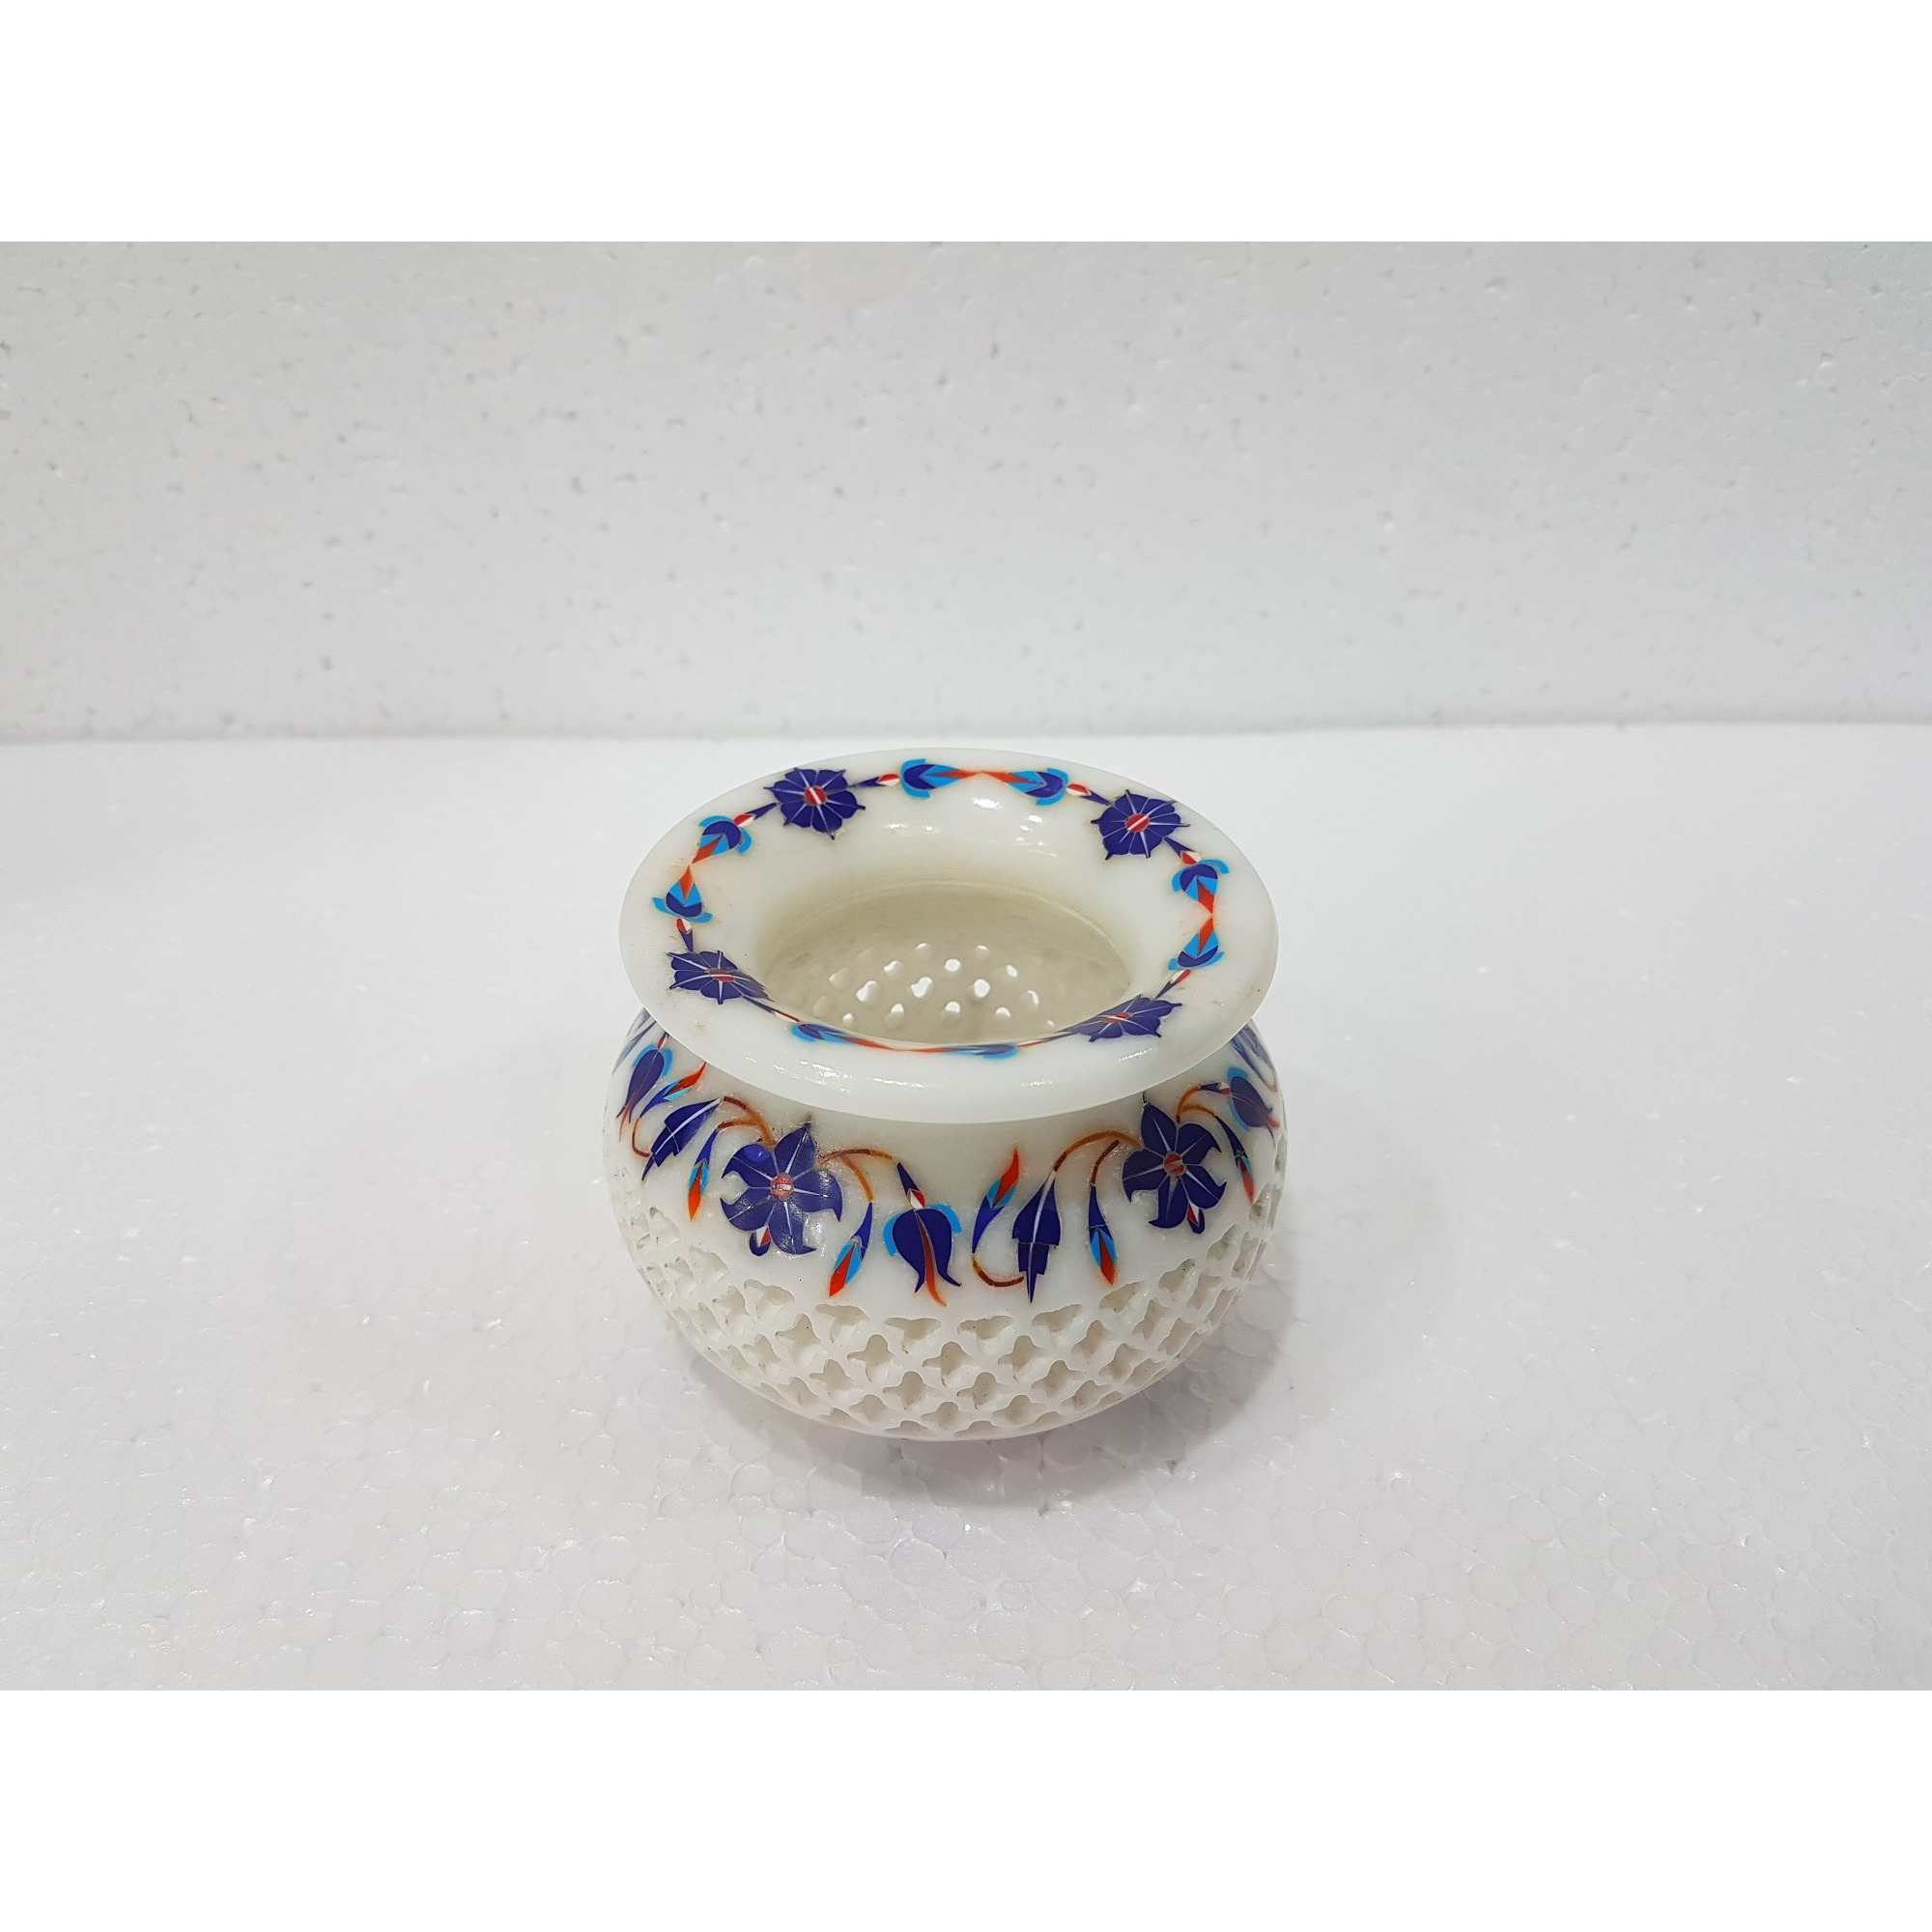 Buy Online Marble Inlay & Filigree Handcrafted Candle Pot -   1044172